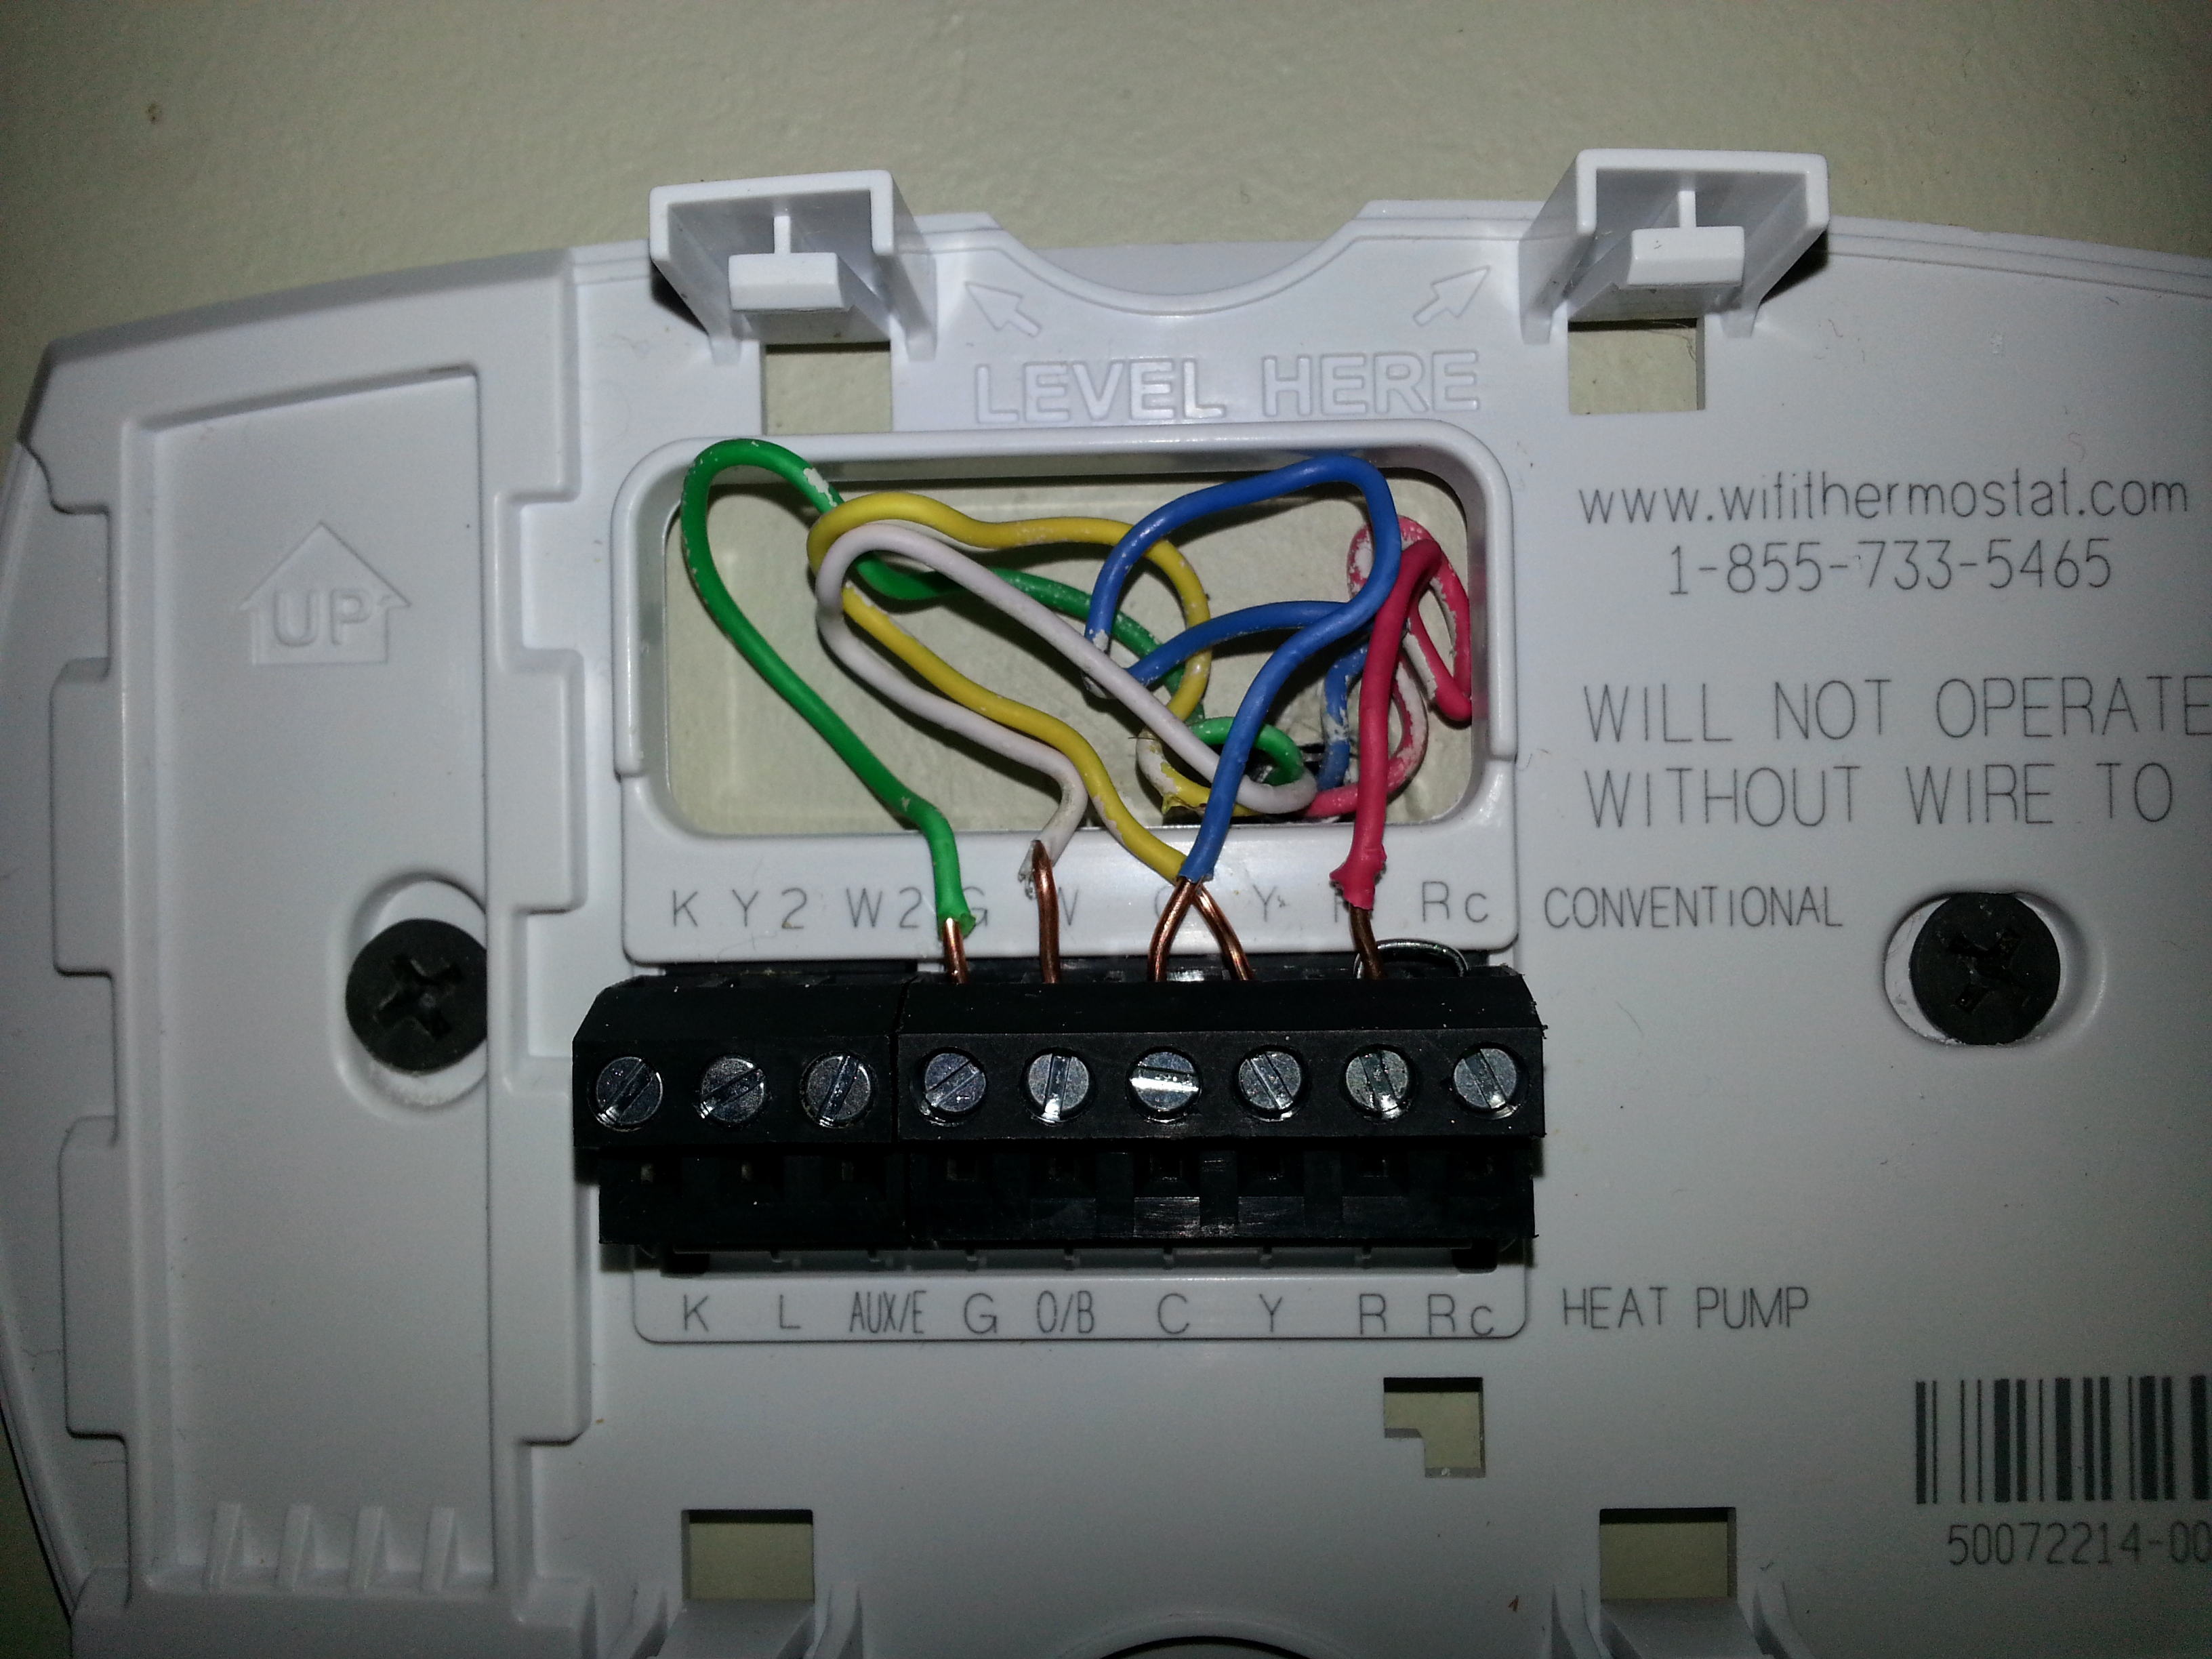 Luxpro Thermostat Wiring Diagram - Wiring Diagrams Img - Honeywell Wifi